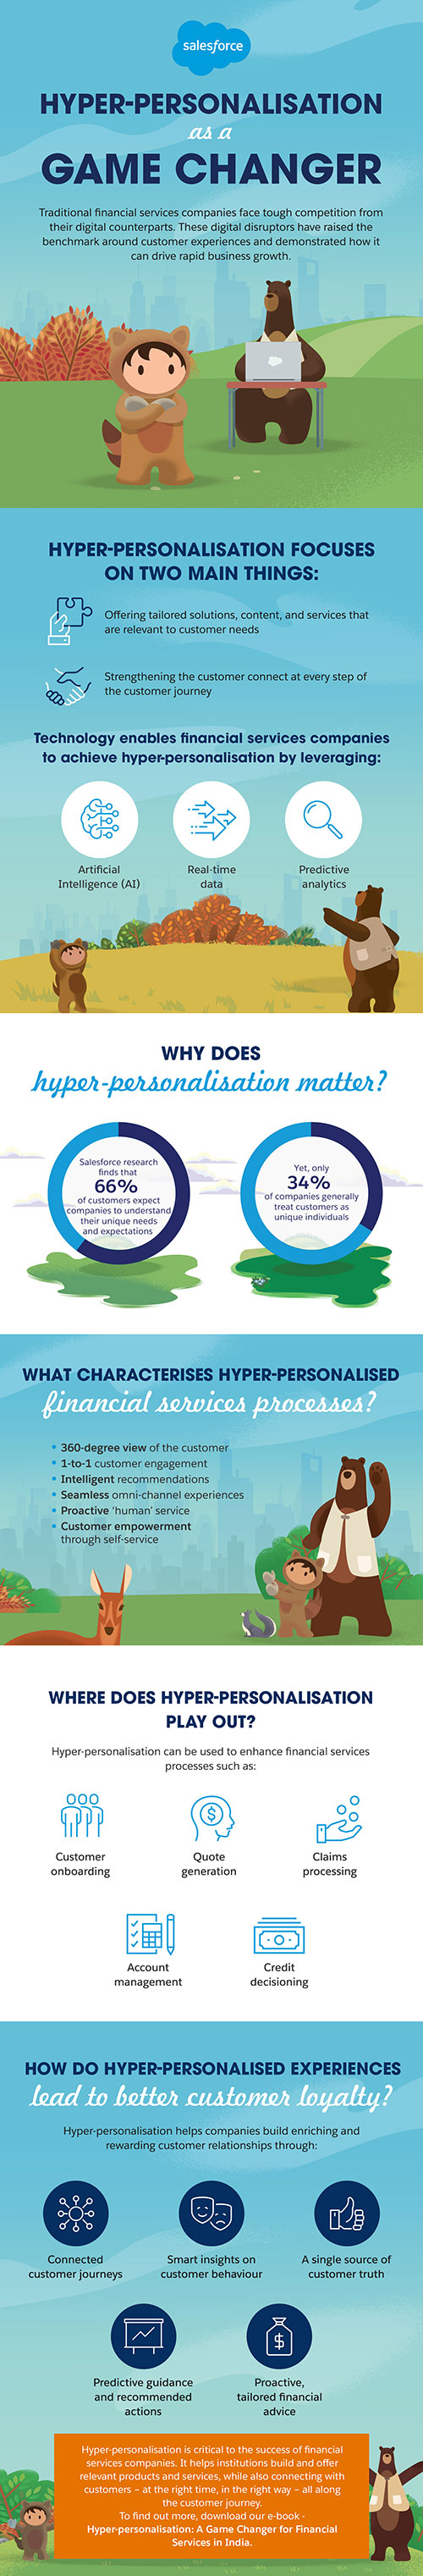 Infographic: Hyper-personalisation as a Game-Changer in Financial Services